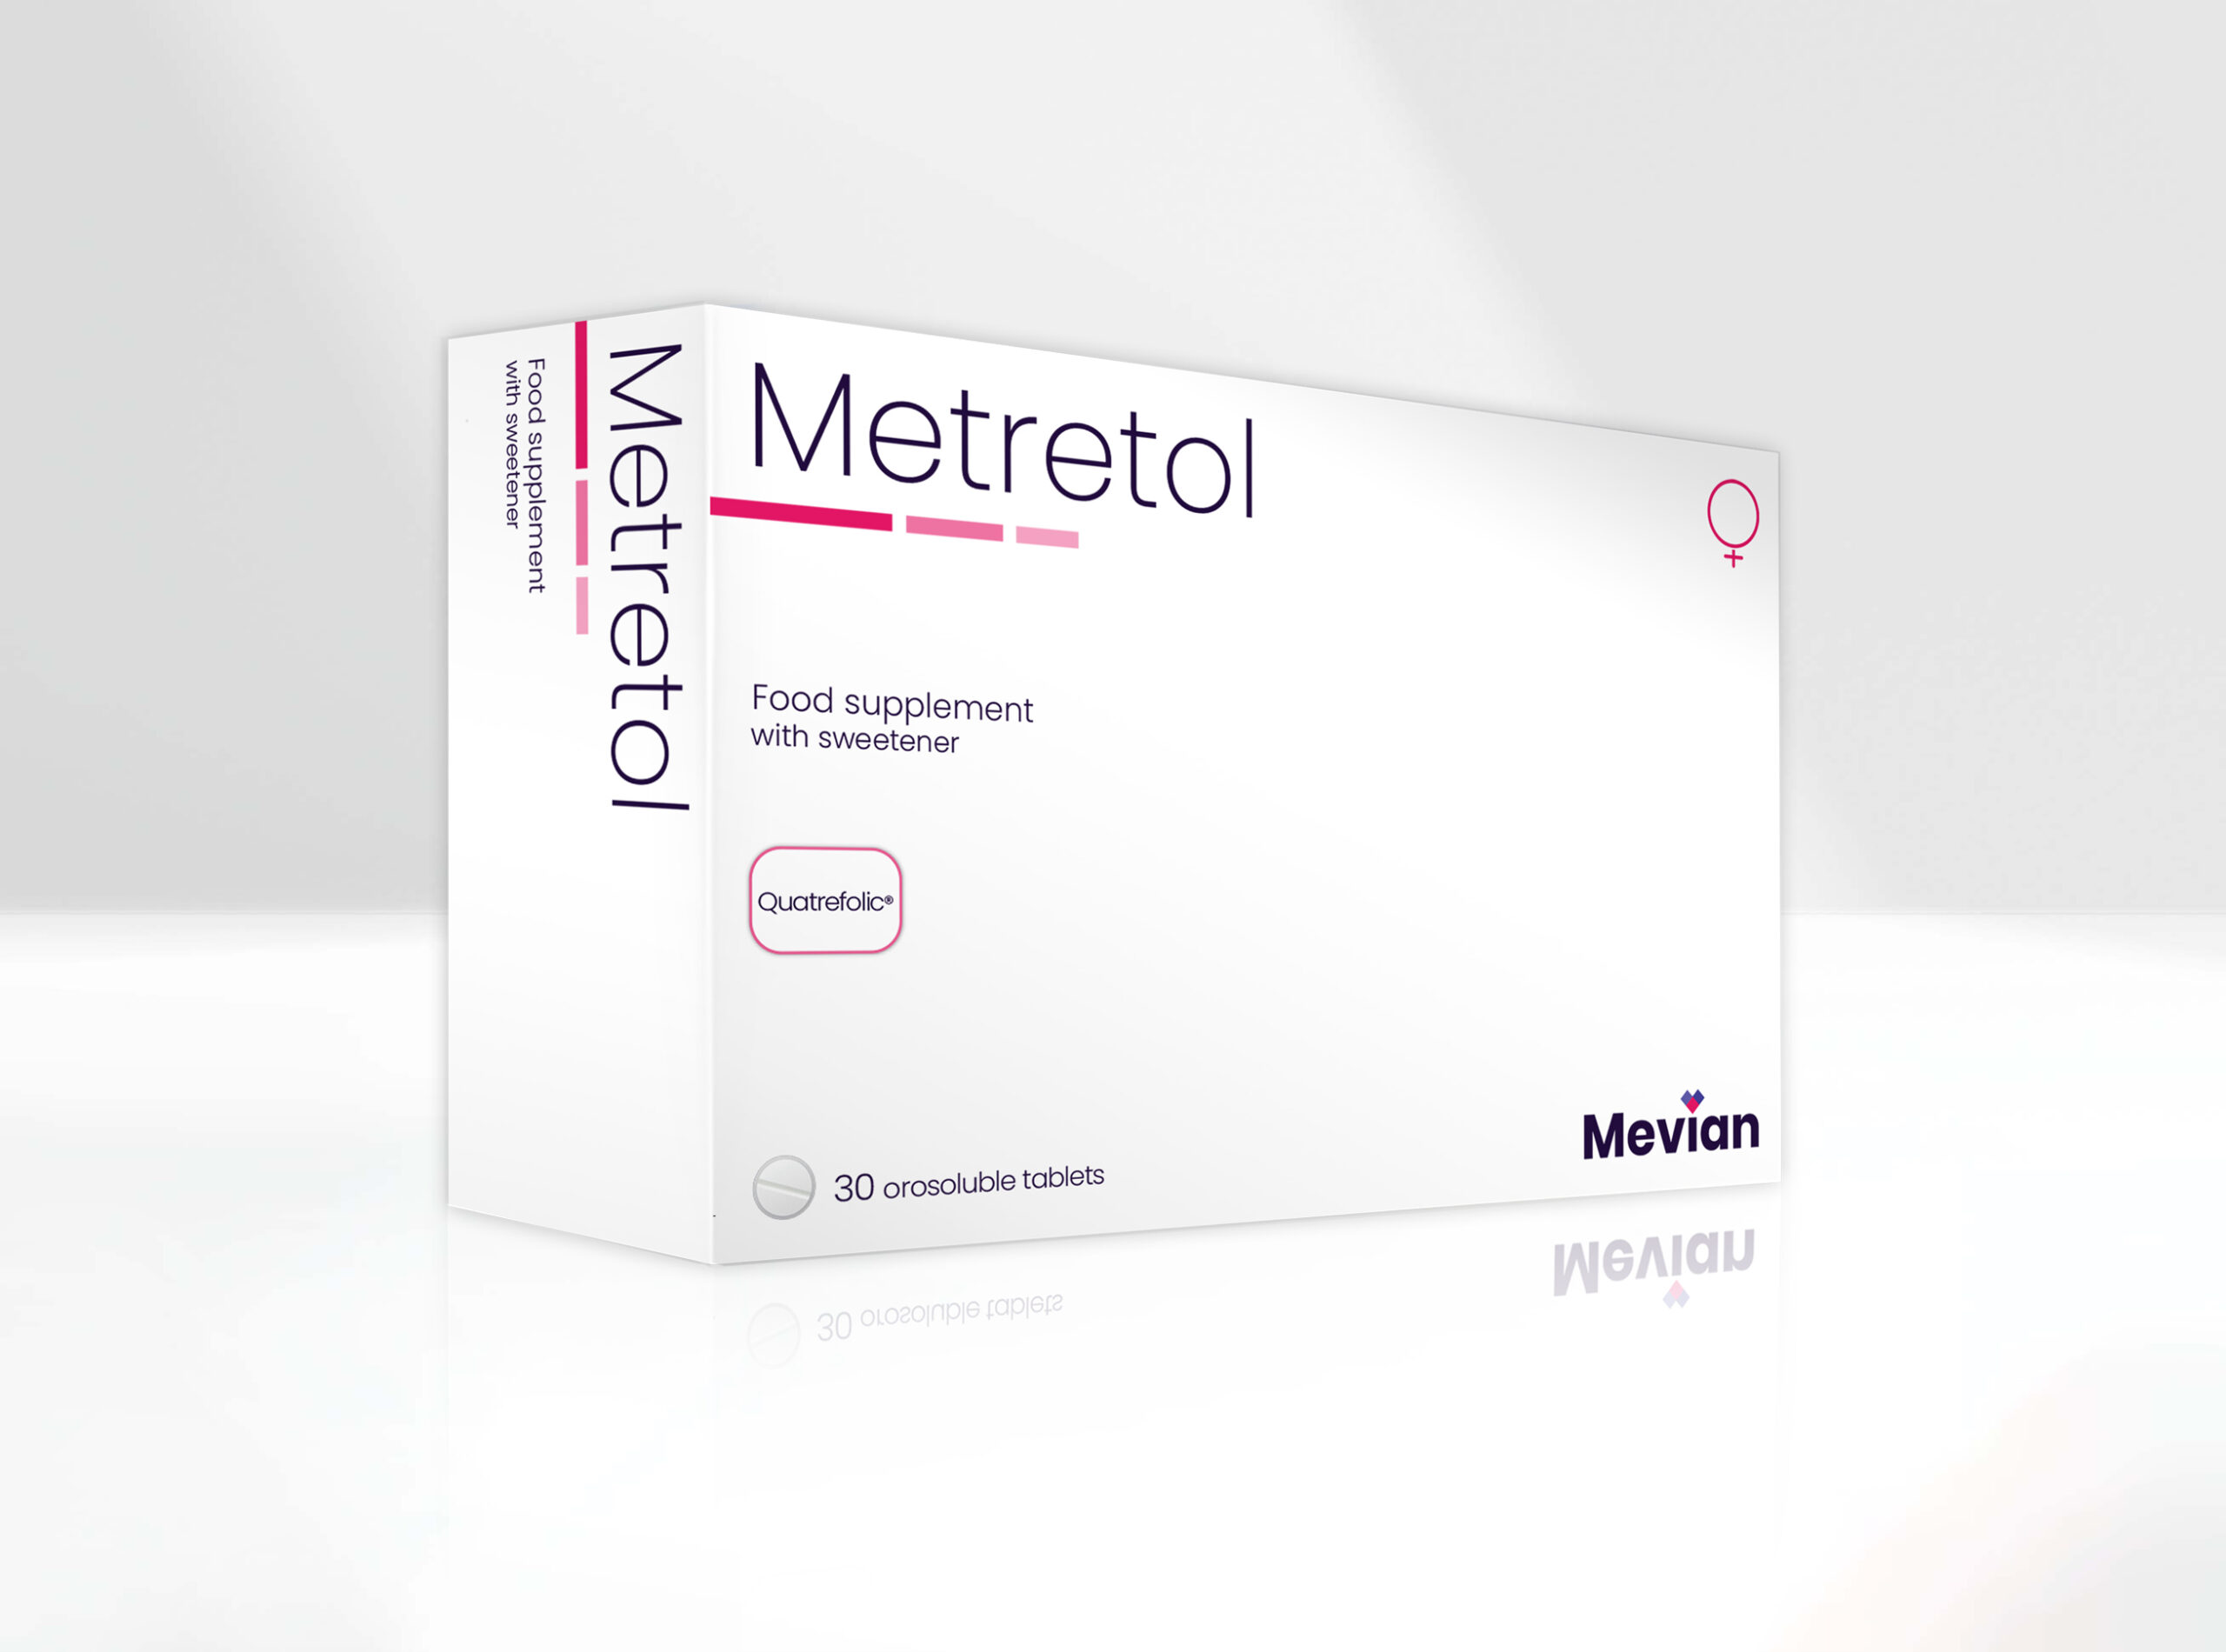 Metretol is ideal for Maternal tissue growth in pregnancy, blood formation, and homocysteine metabolism, counteracts the development of neural tube defects in the developing fetus.